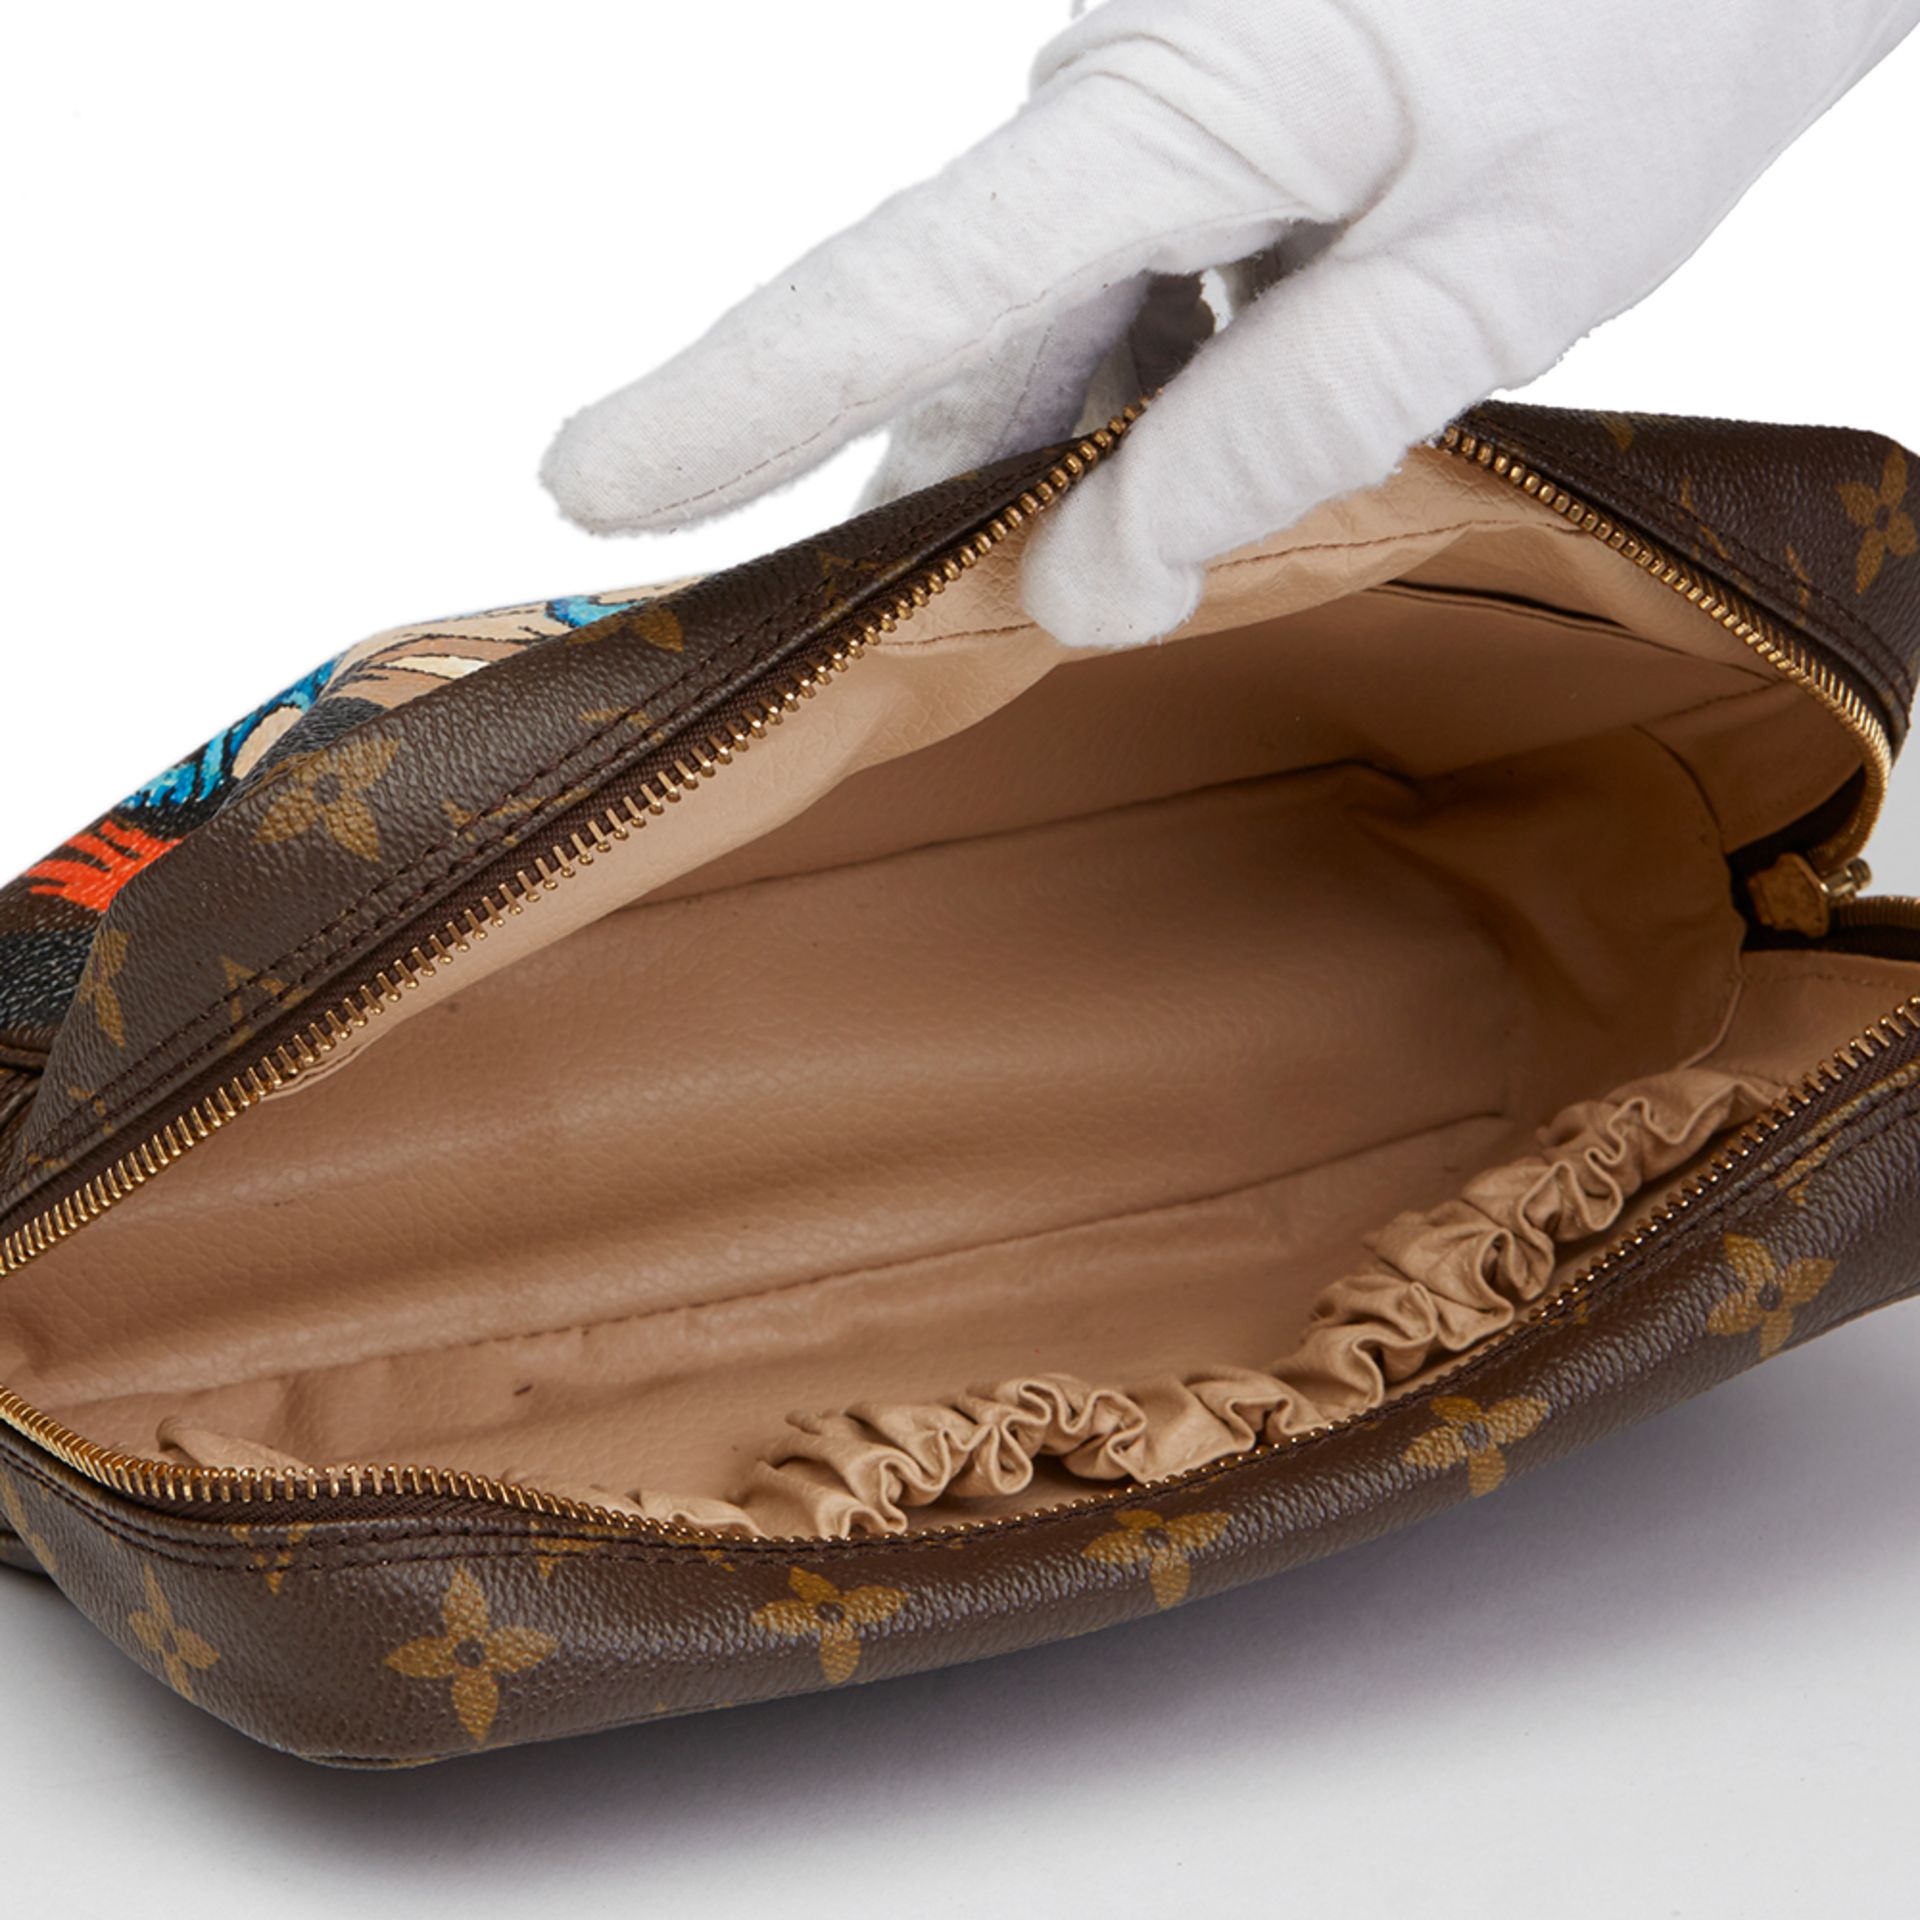 Louis Vuitton Hand-painted 'Sick of it all' X Year Zero London Toiletry Pouch - Image 8 of 11